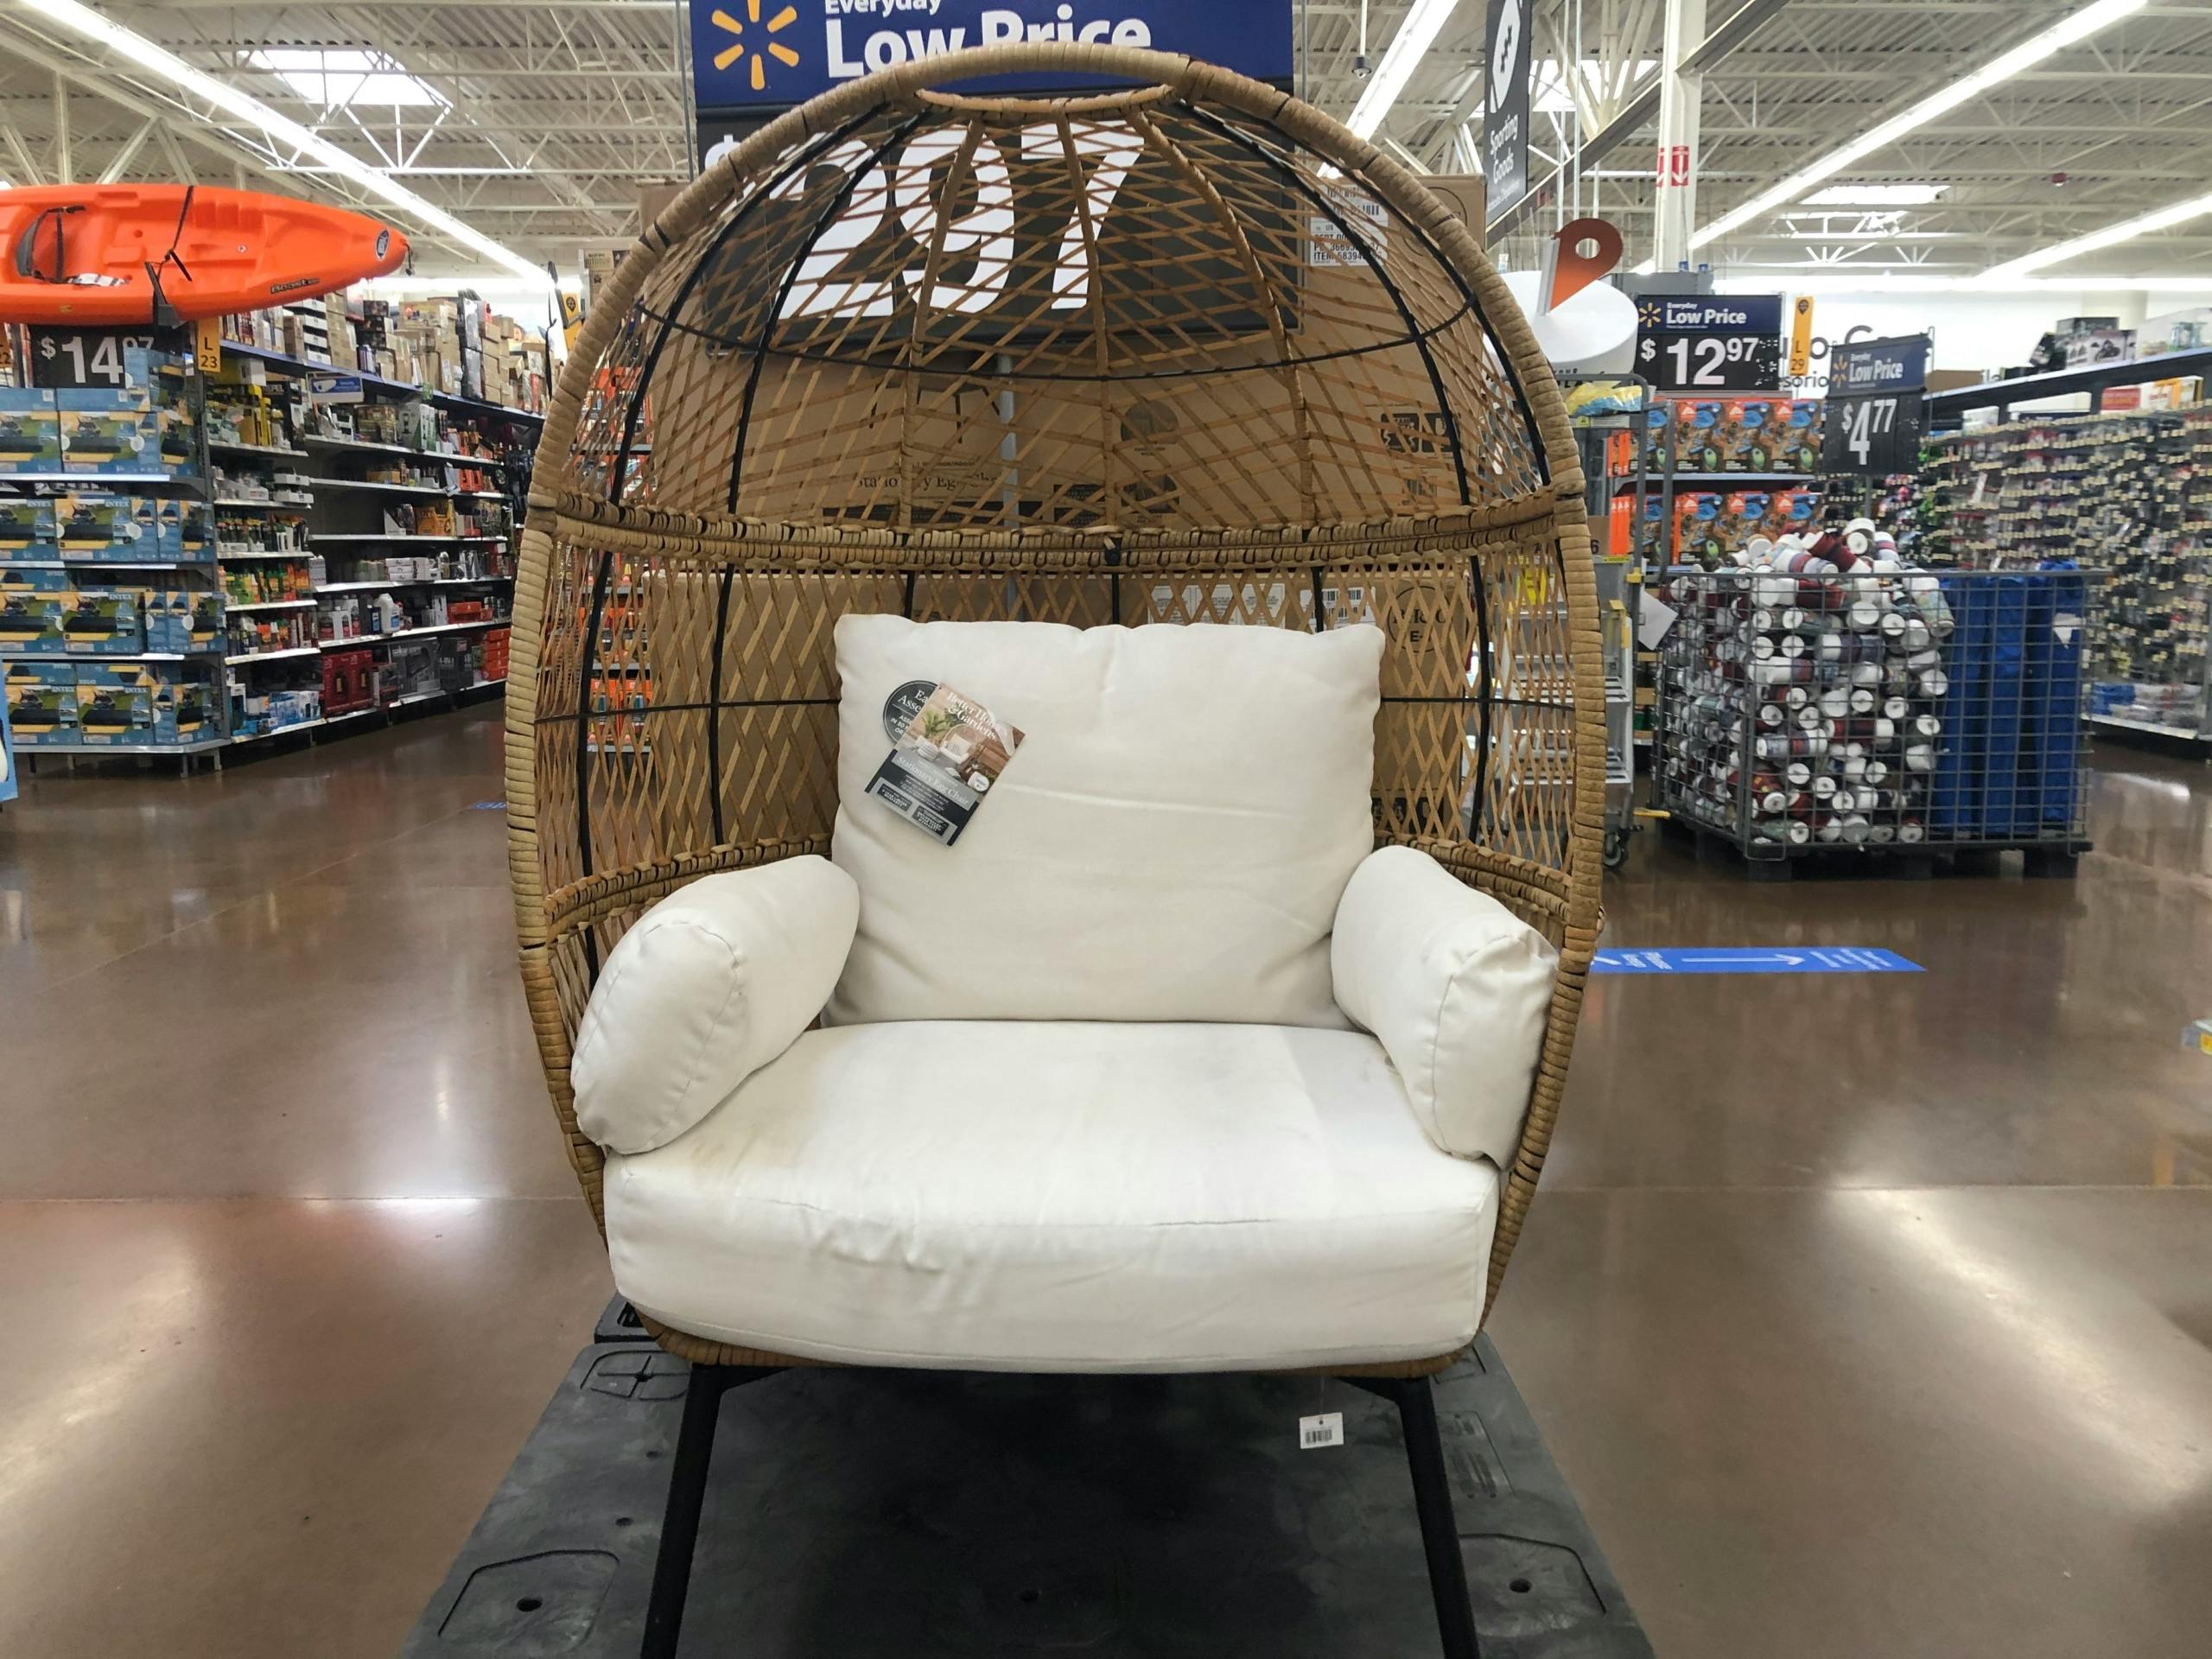 15 Patio Egg Chairs You Ll Want To Buy In 2021 The Krazy Coupon Lady